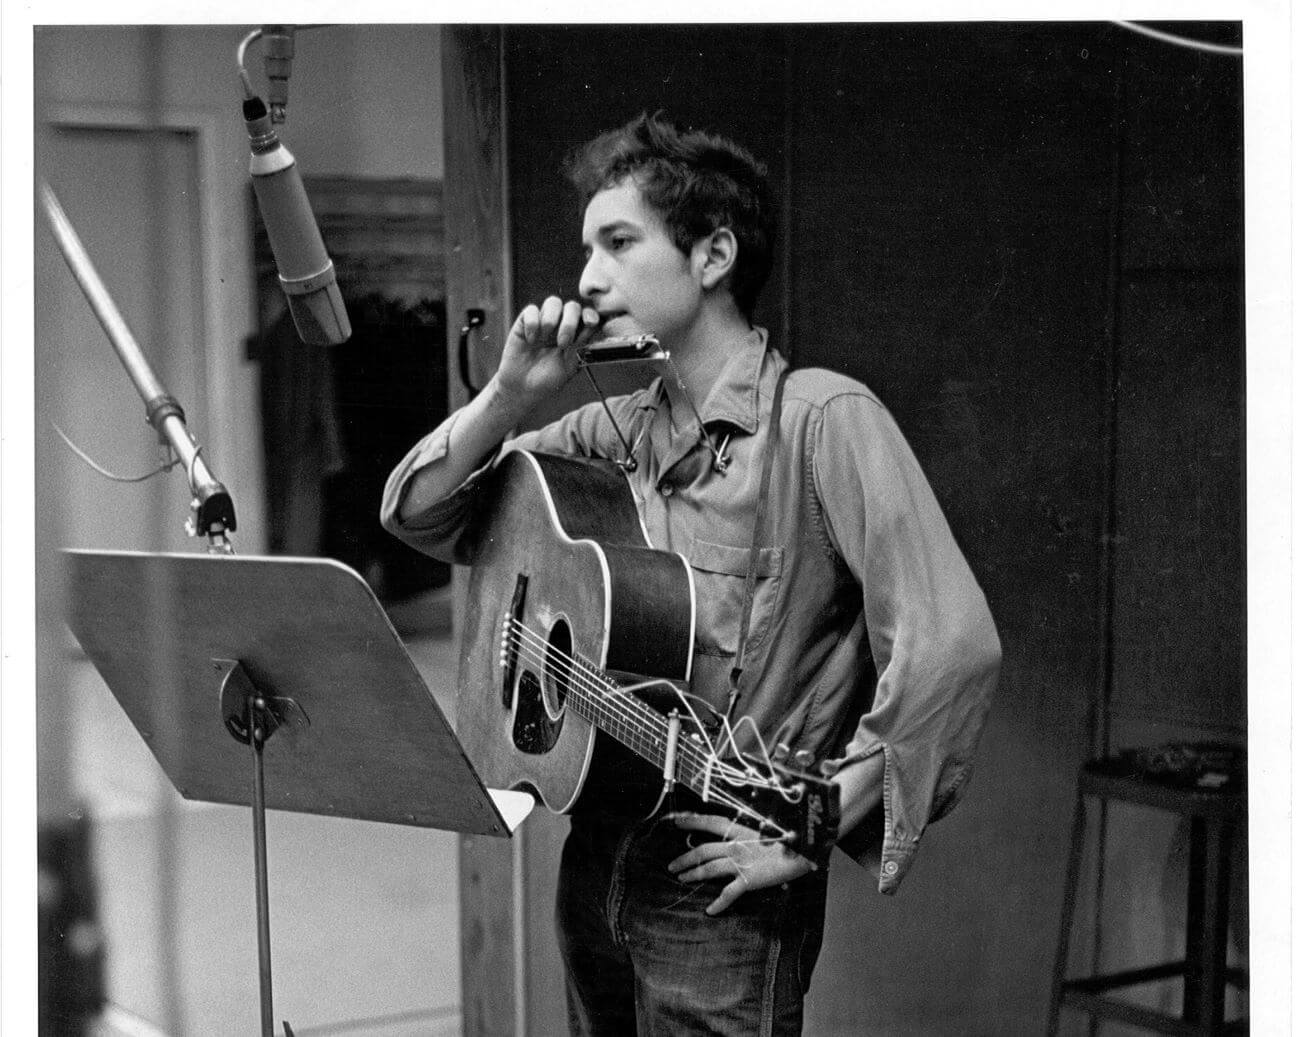 A black and white picture of Bob Dylan playing guitar and standing in front of a music stand.